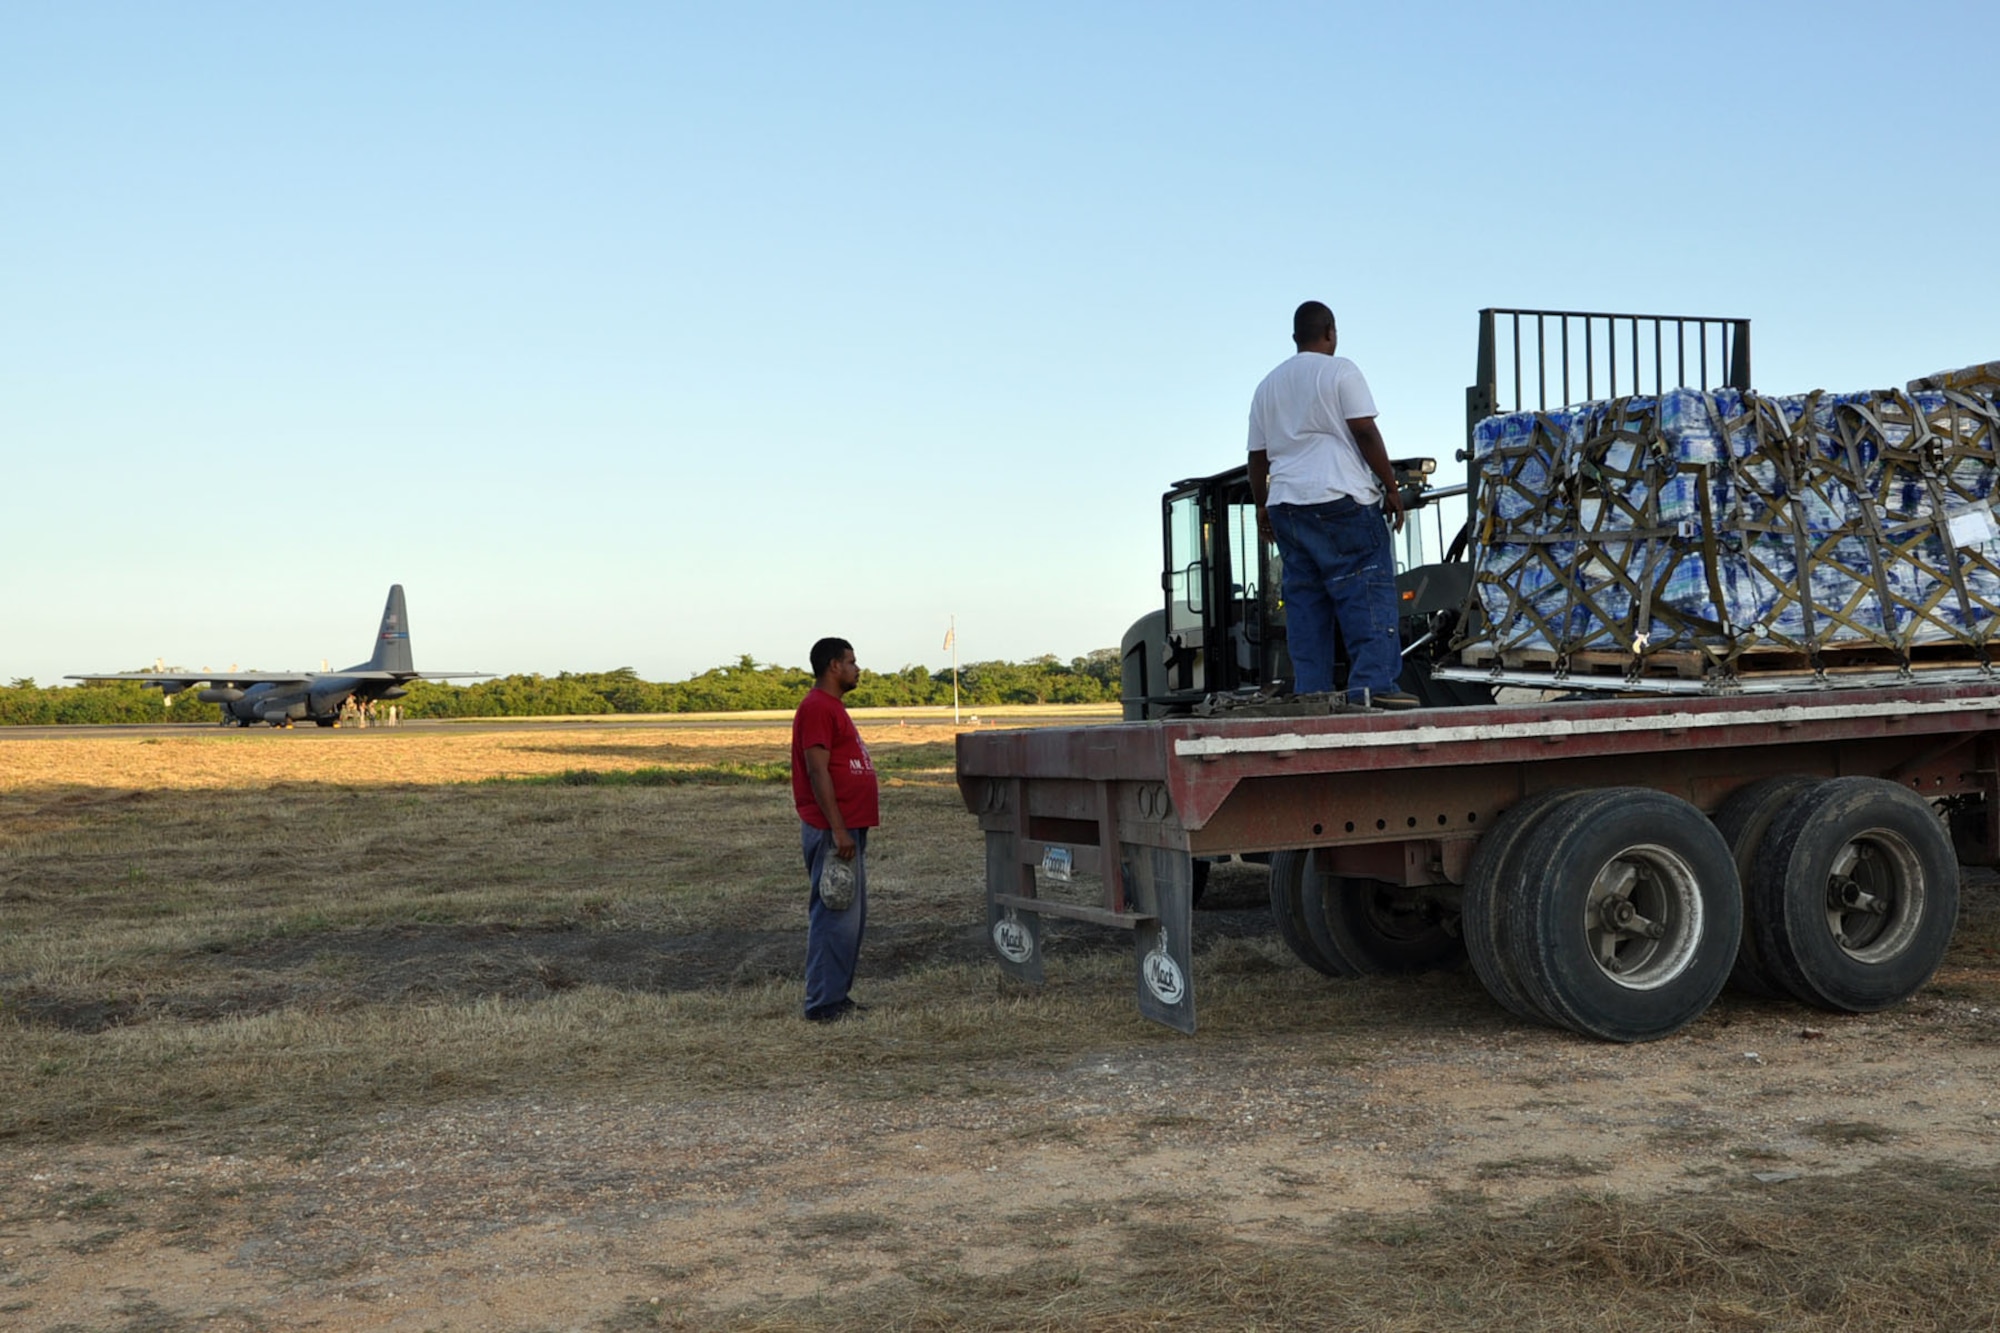 SAN ISIDIRO AIR BASE, Dominican Republic -- Workers observe as a forklift lowers a pallet of cargo on to the bed of a truck sitting just off the tarmac here, January 21. A C-130H Hercules cargo aircraft, assigned to the U.S. Air Force Reserve's 910th Airlift Wing can be seen in the background. The aircraft, based at Youngstown Air Reserve Station, Ohio, just delivered a cargo of 18,400 pounds of food and water to the air base, located just outside of the Dominican capital of Santo Domingo. From here, it will be trucked across the island to Port-au Prince, Haiti as part of the massive international effort to provide relief to the people of the Caribbean island nation in the aftermath of a devastating January 12 earthquake. U.S. Air Force photo by Master Sgt. Bob Barko Jr.